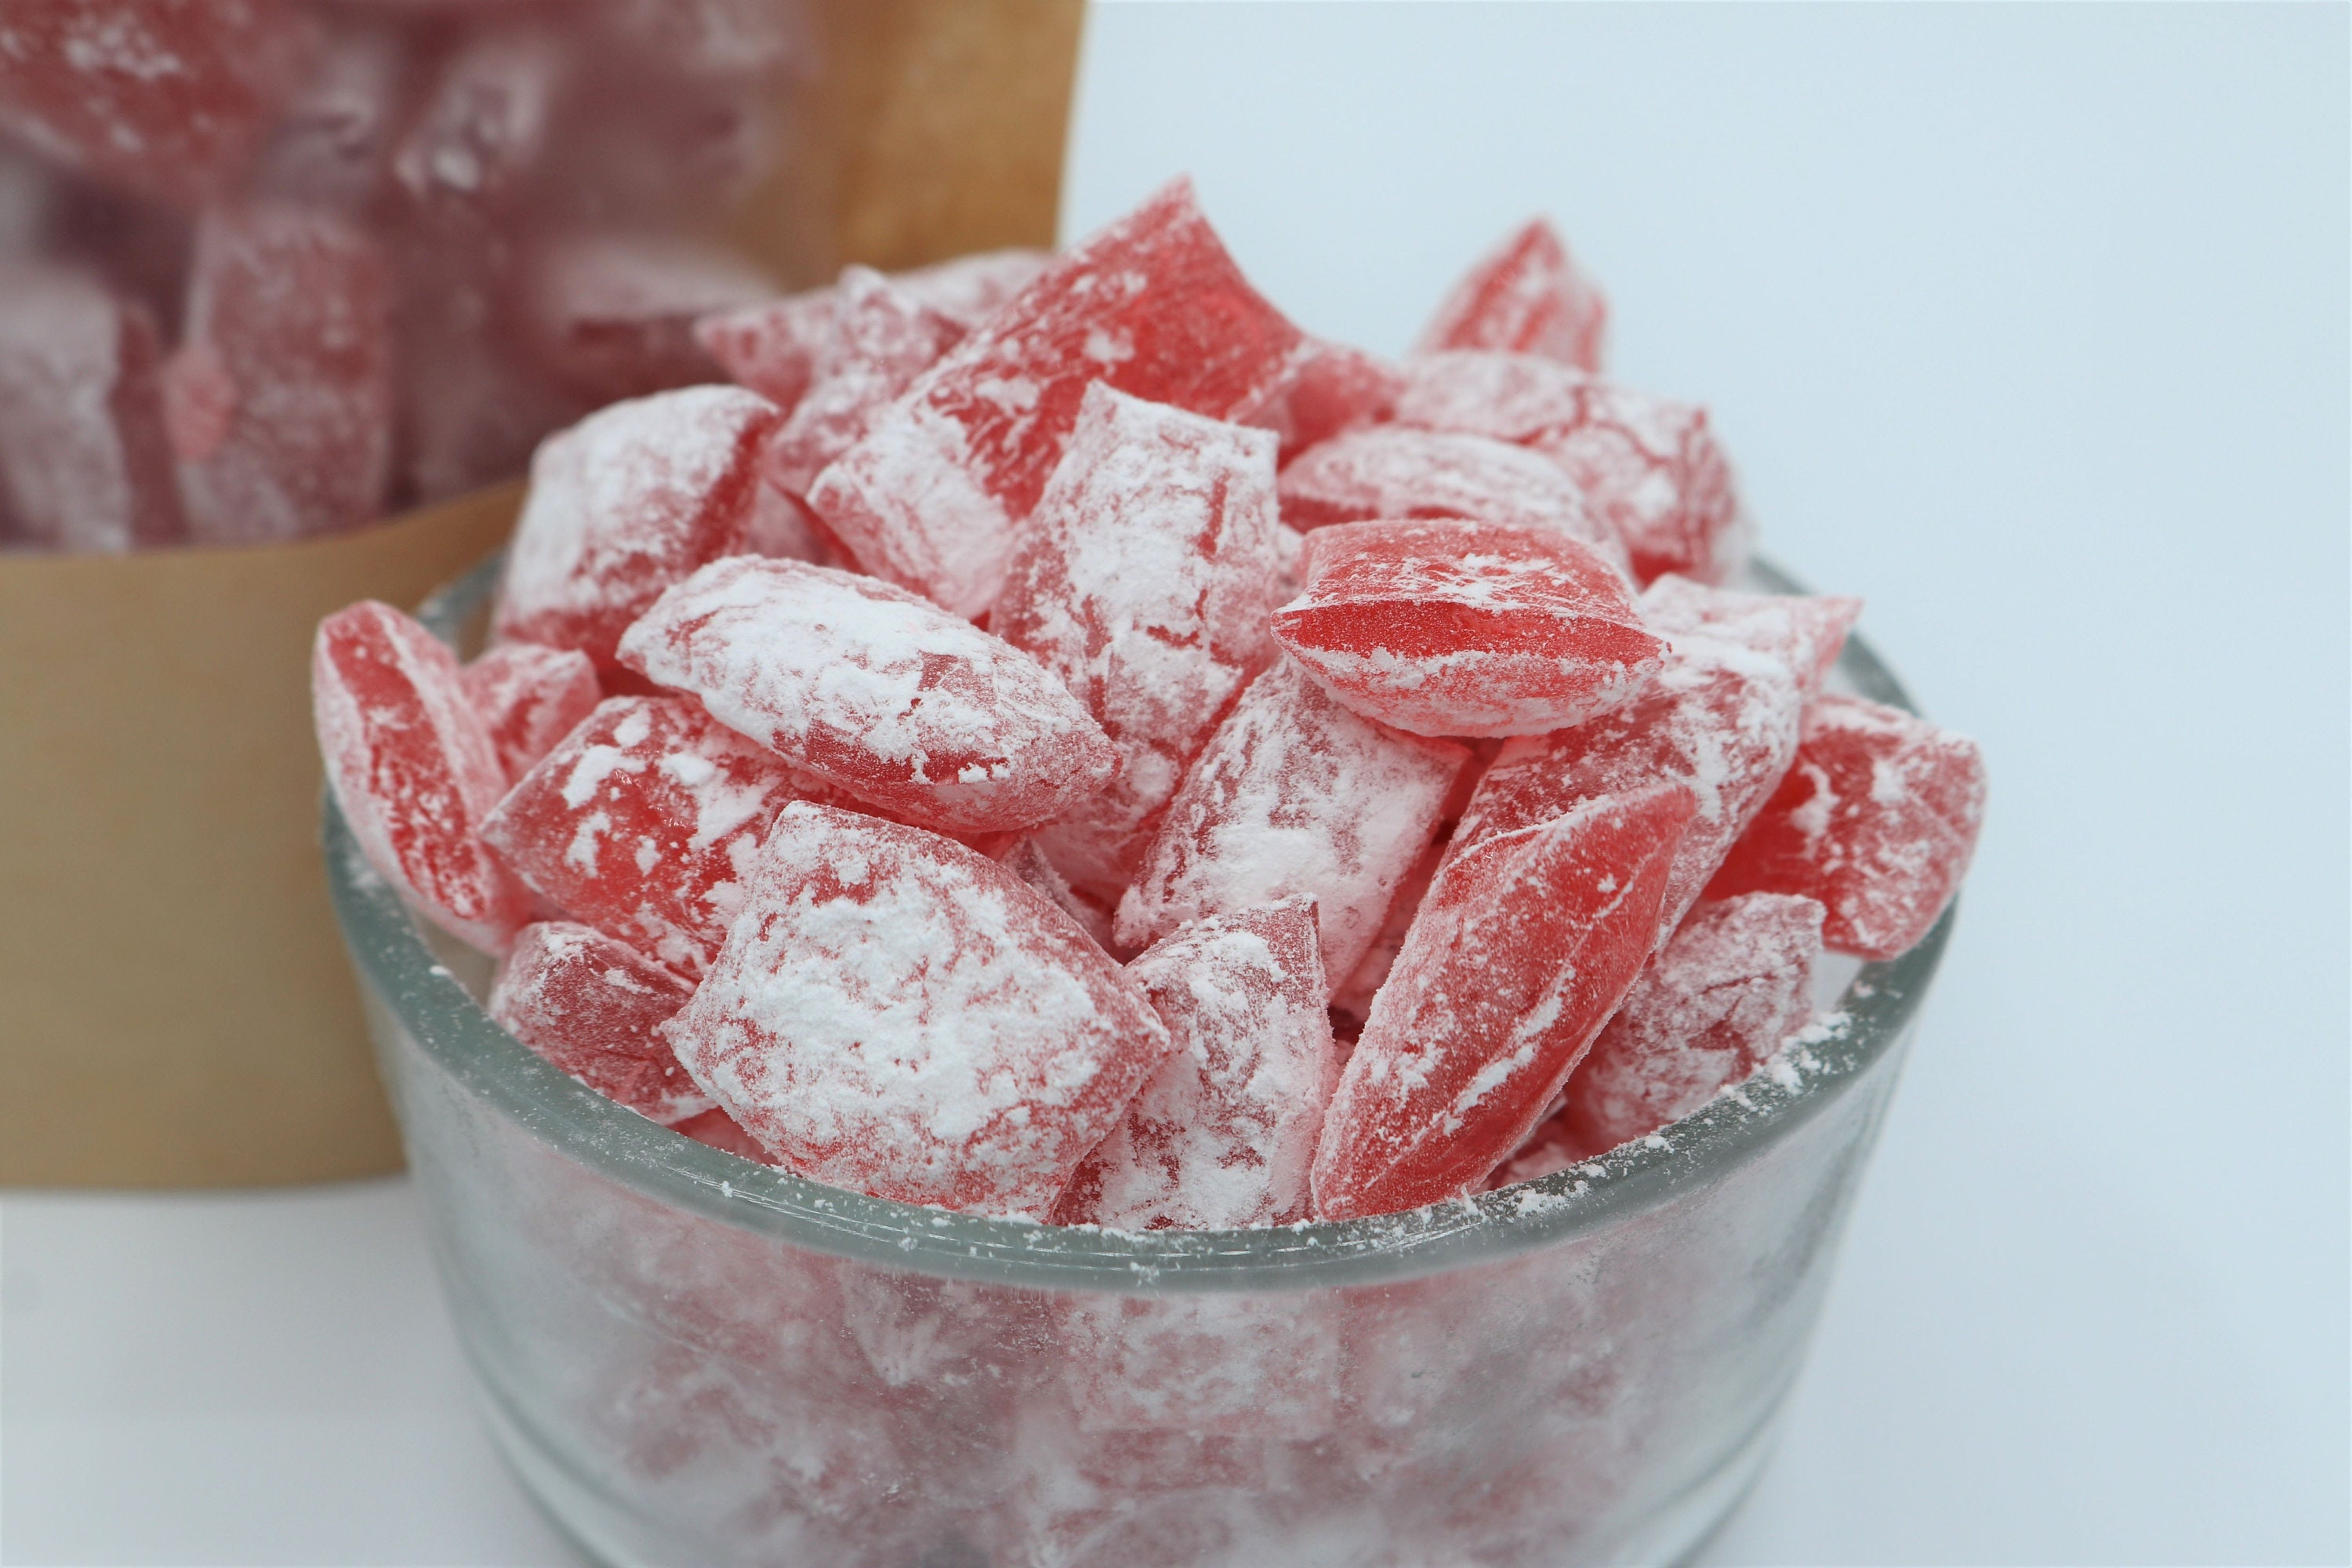 Cinnamon Hard Tack Candy, Rock Candy, Old-fashioned, Homemade